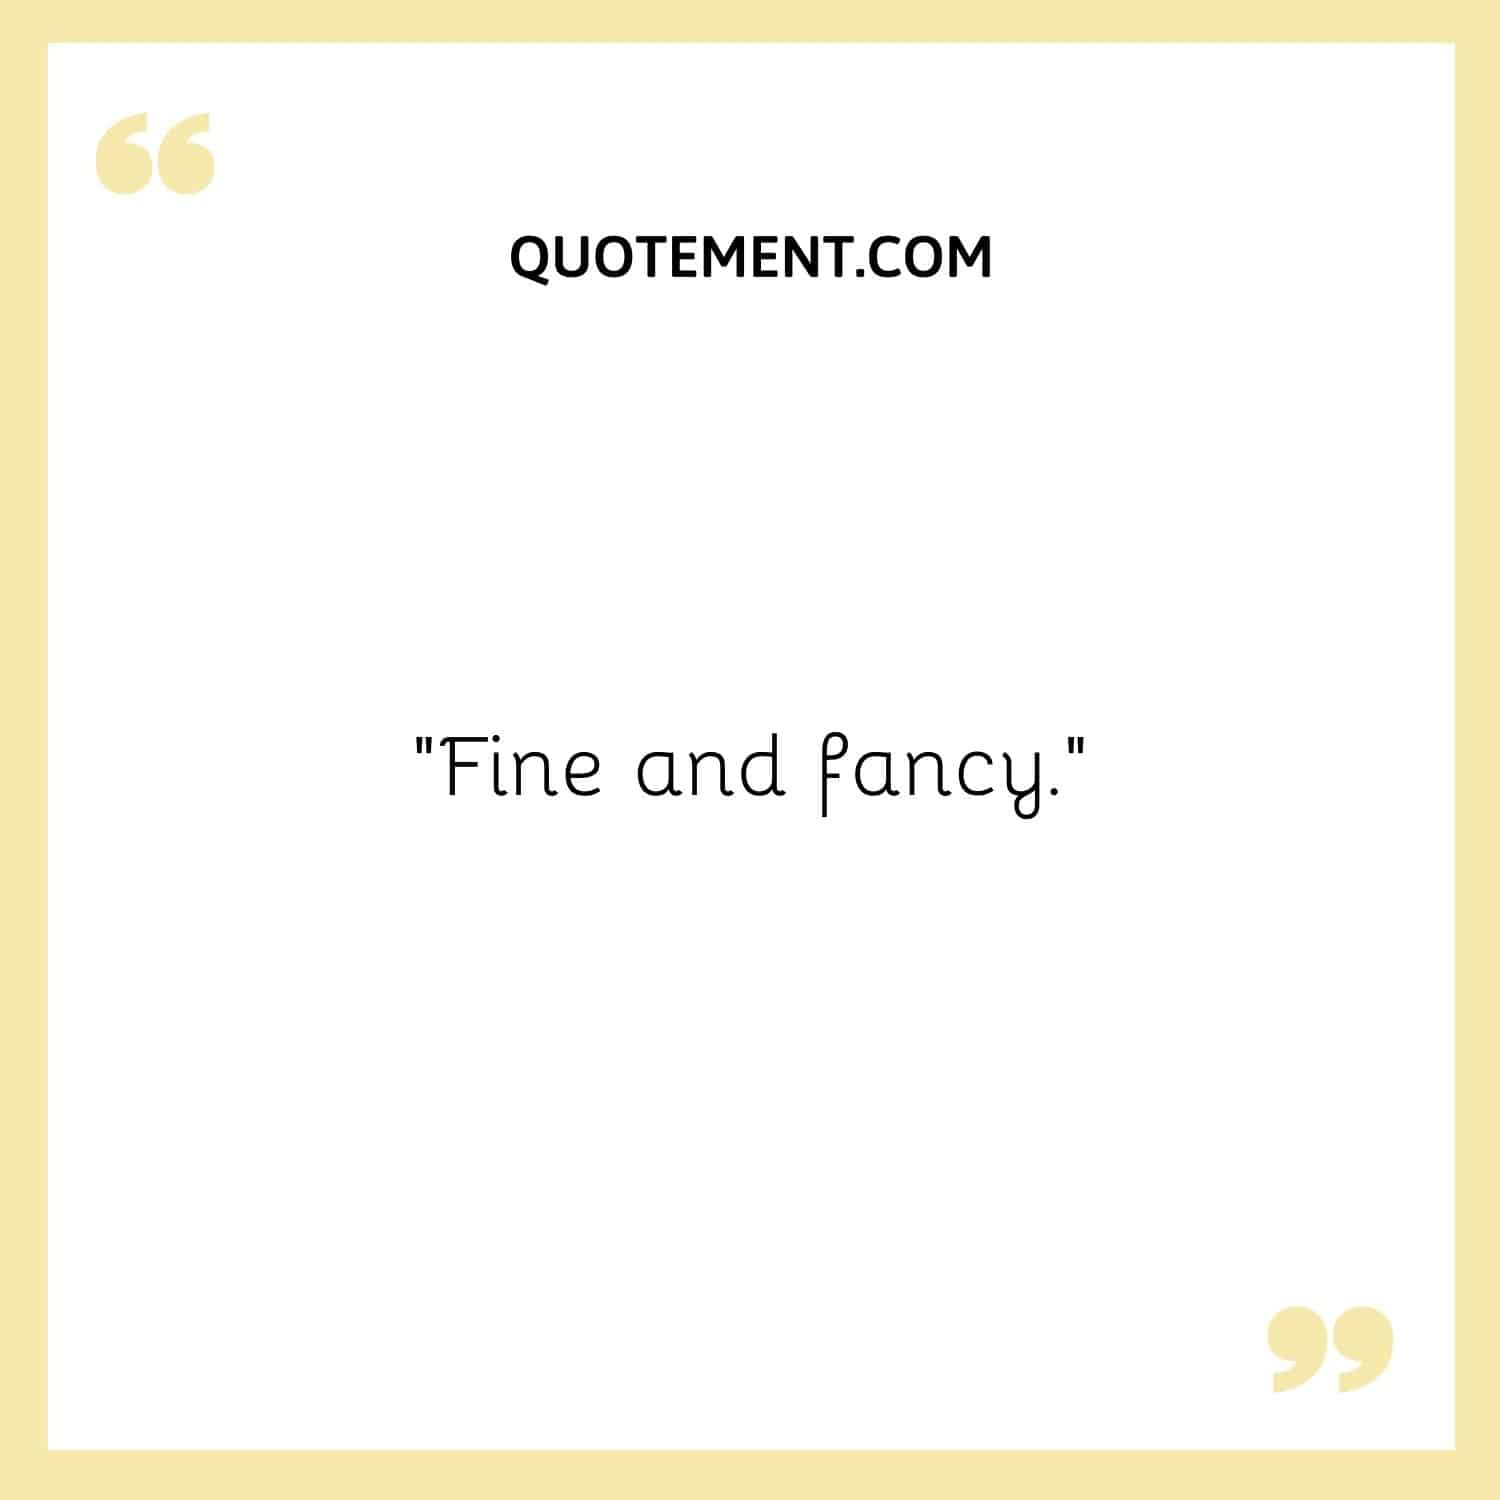 Fine and fancy.